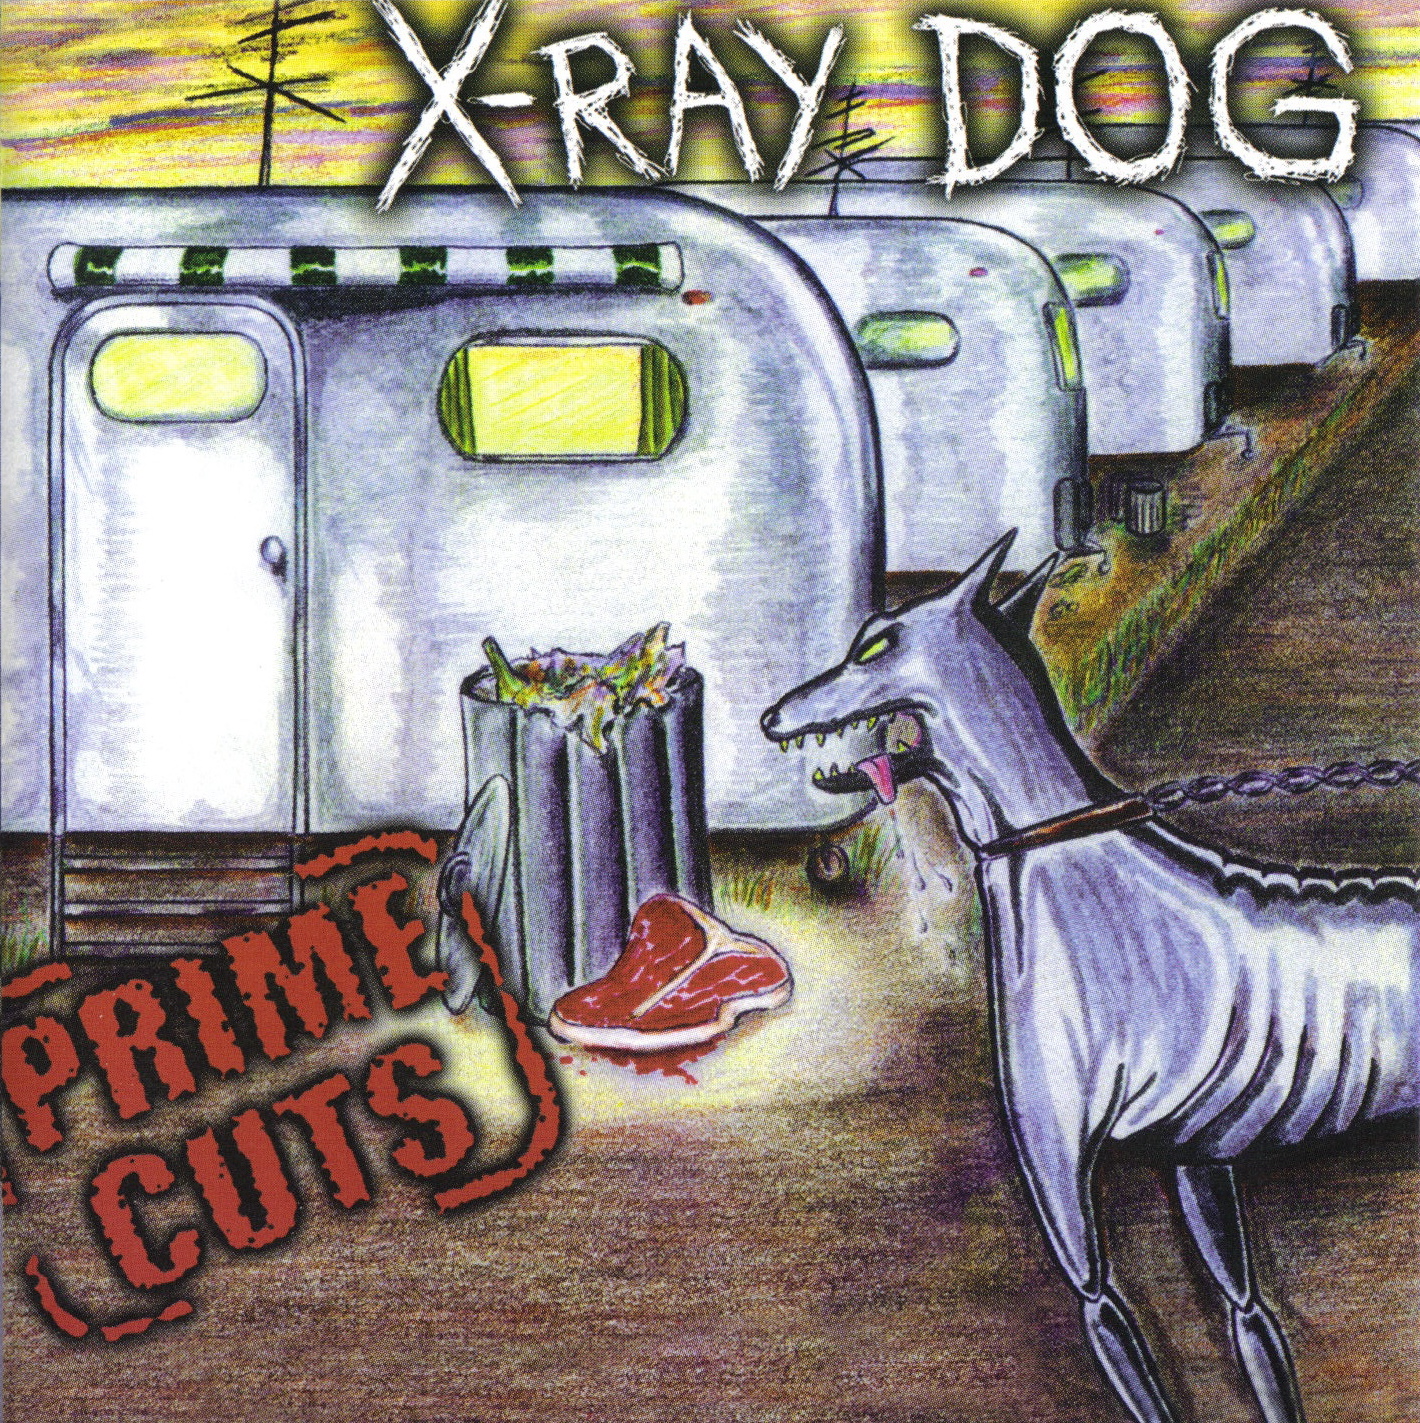 X-Ray Dog - Prime Cuts - CD 03 Prime Cuts Front Cover - Scanned.jpg